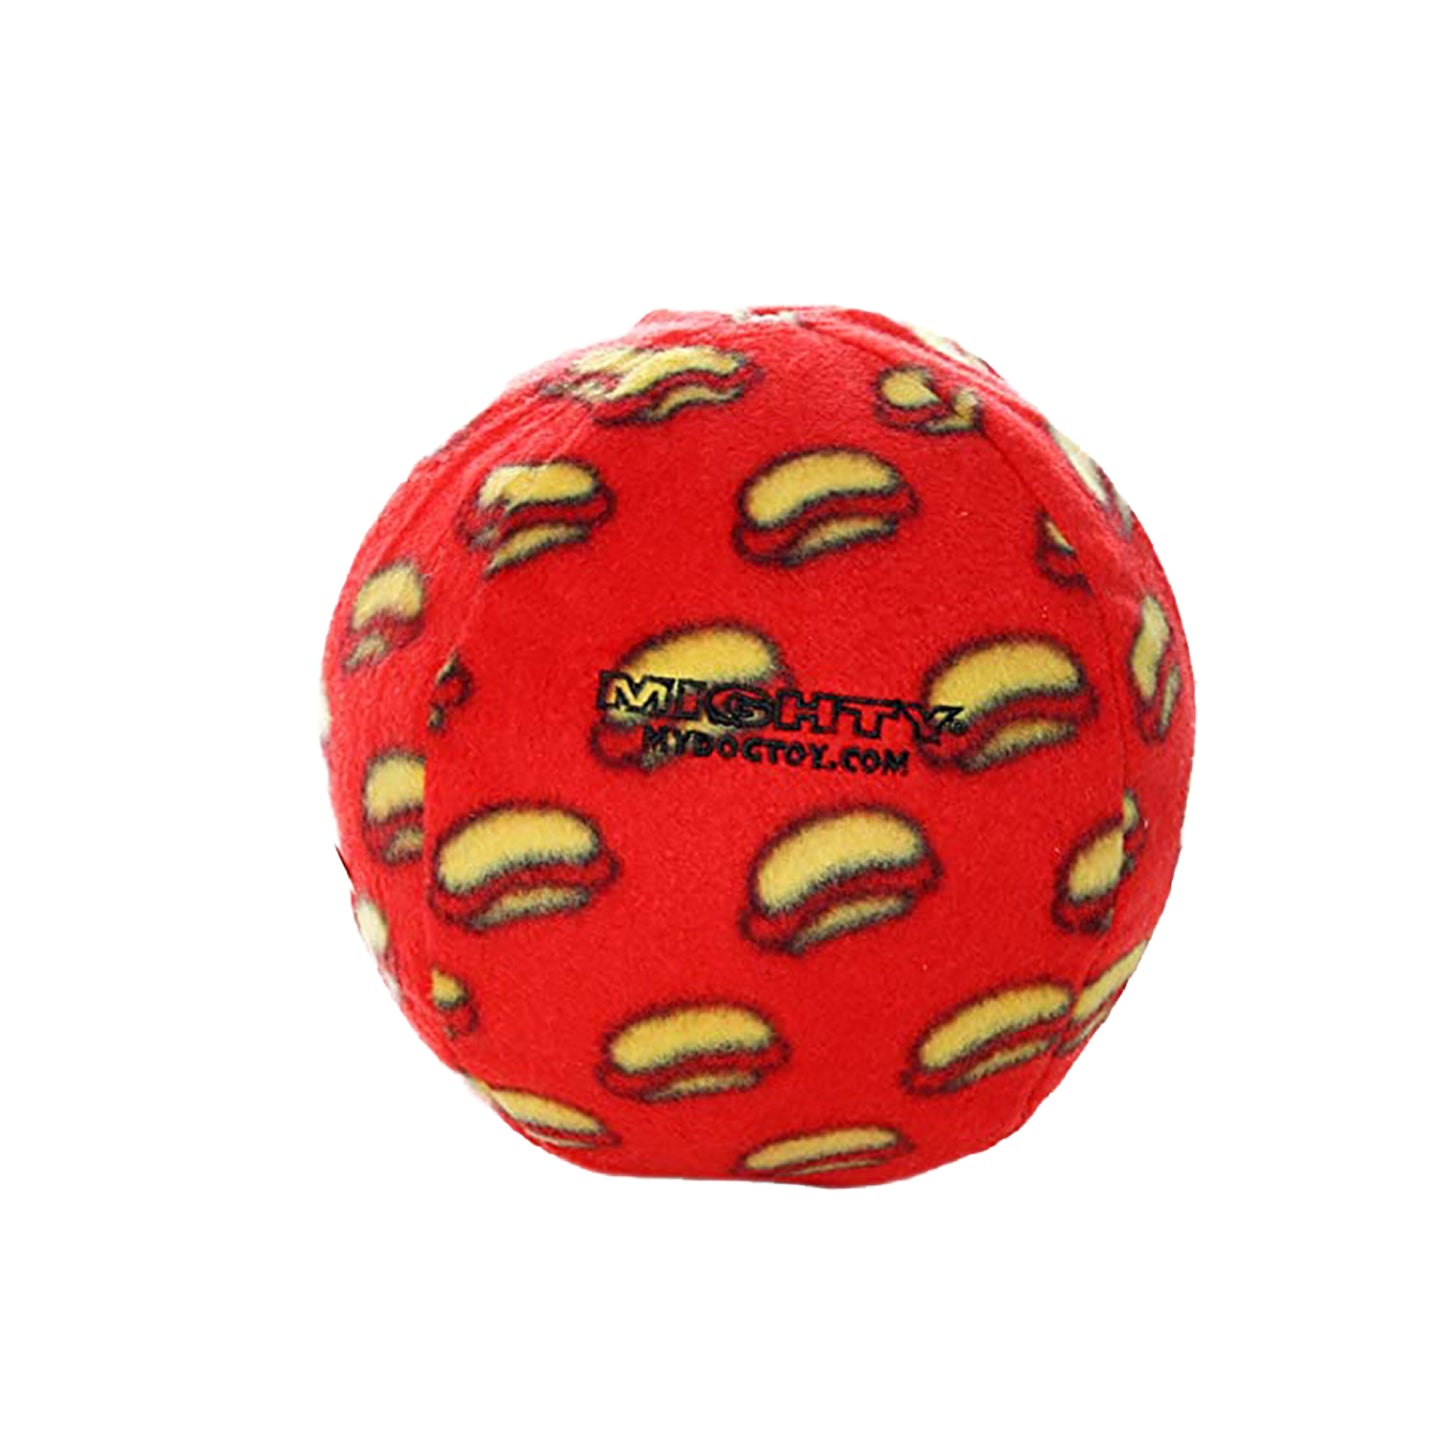 Tuffy Mighty Ball Durable Squeaky Dog Toy, Red